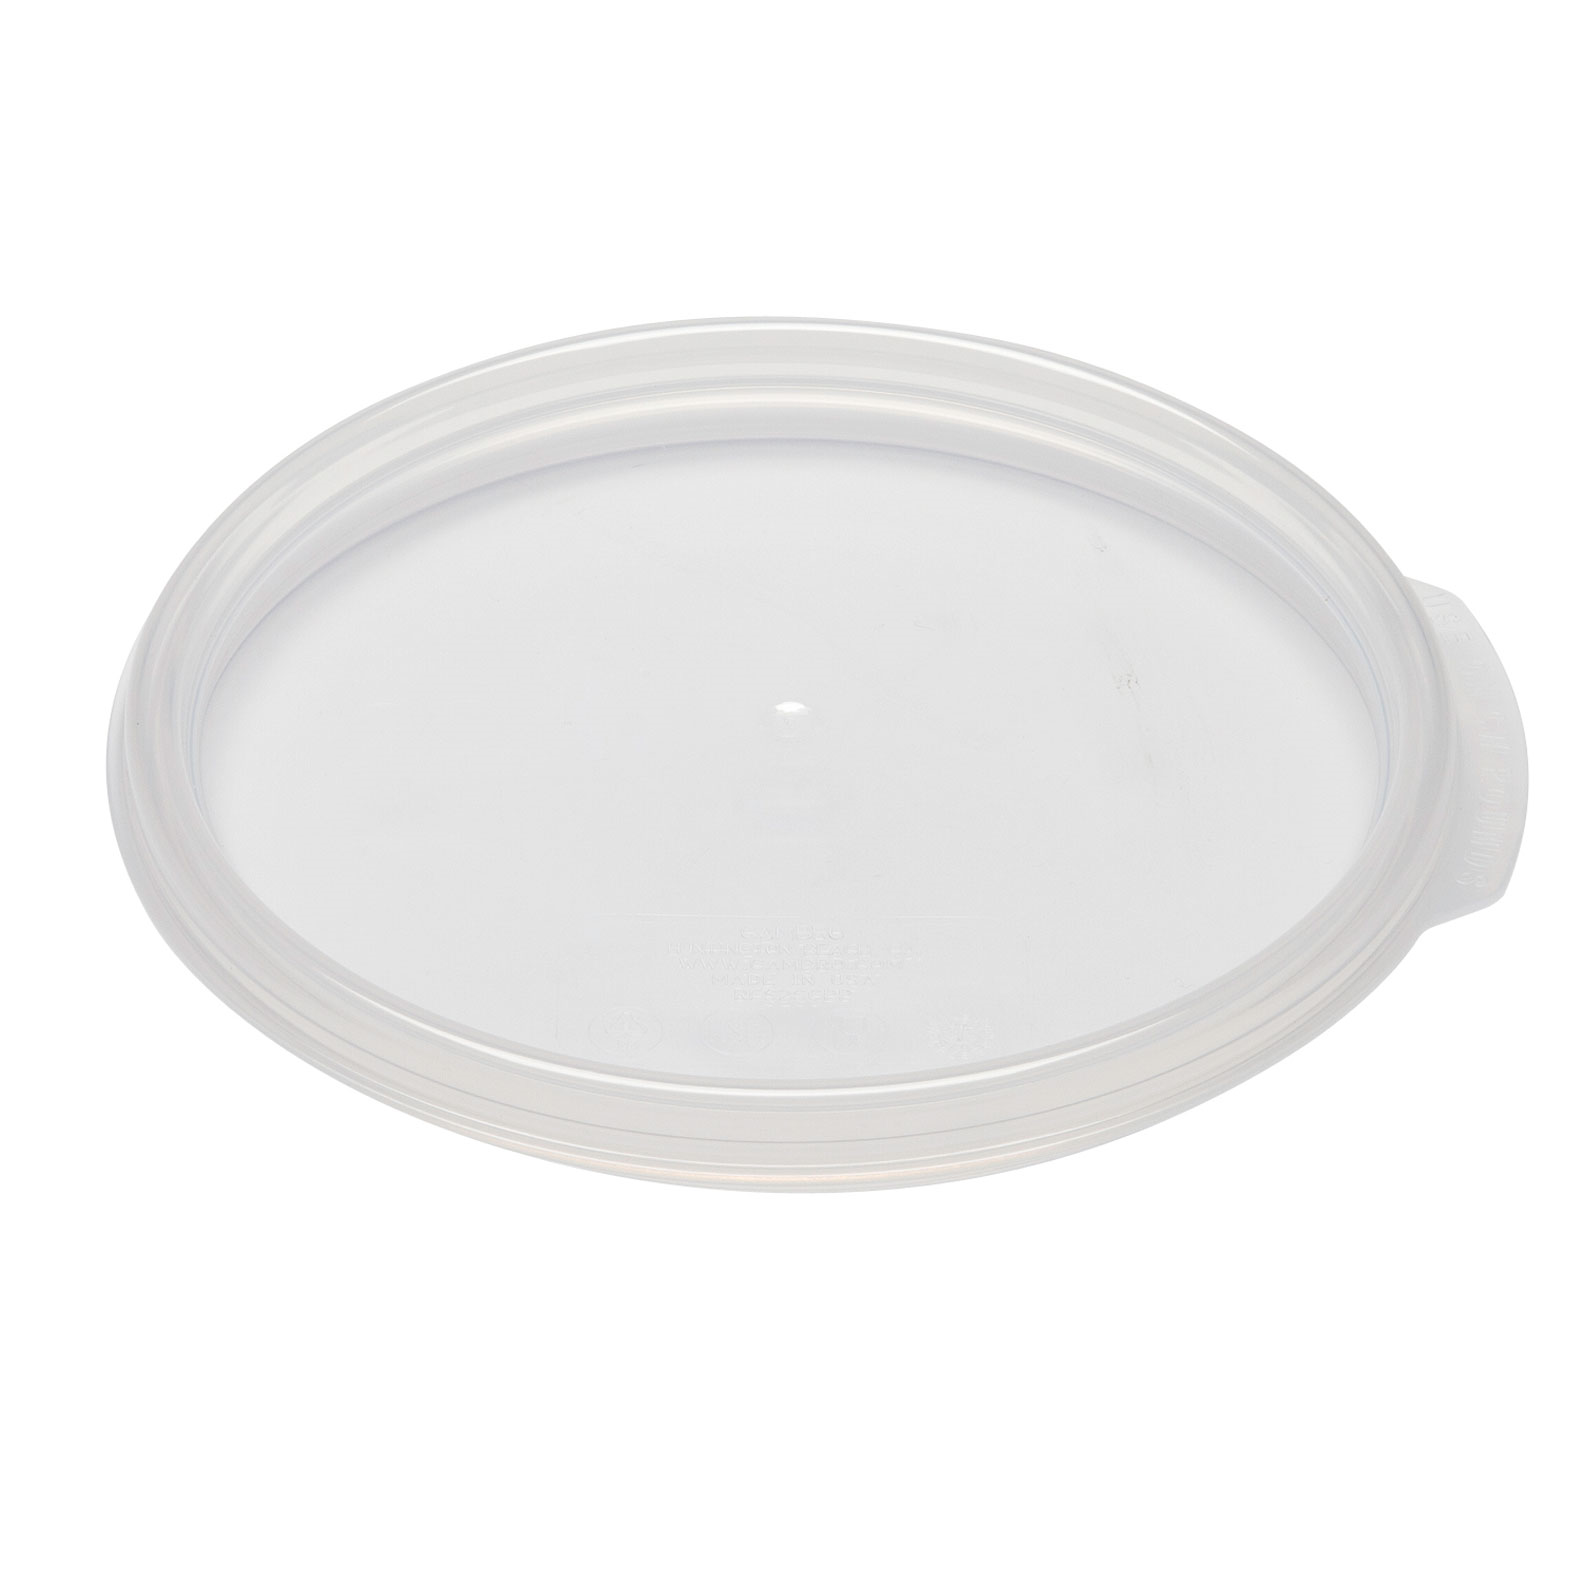 SEAL COVER FOR CW CLEAR
2&amp;4qt. ROUND FOOD CONTAINERS,
EACH 